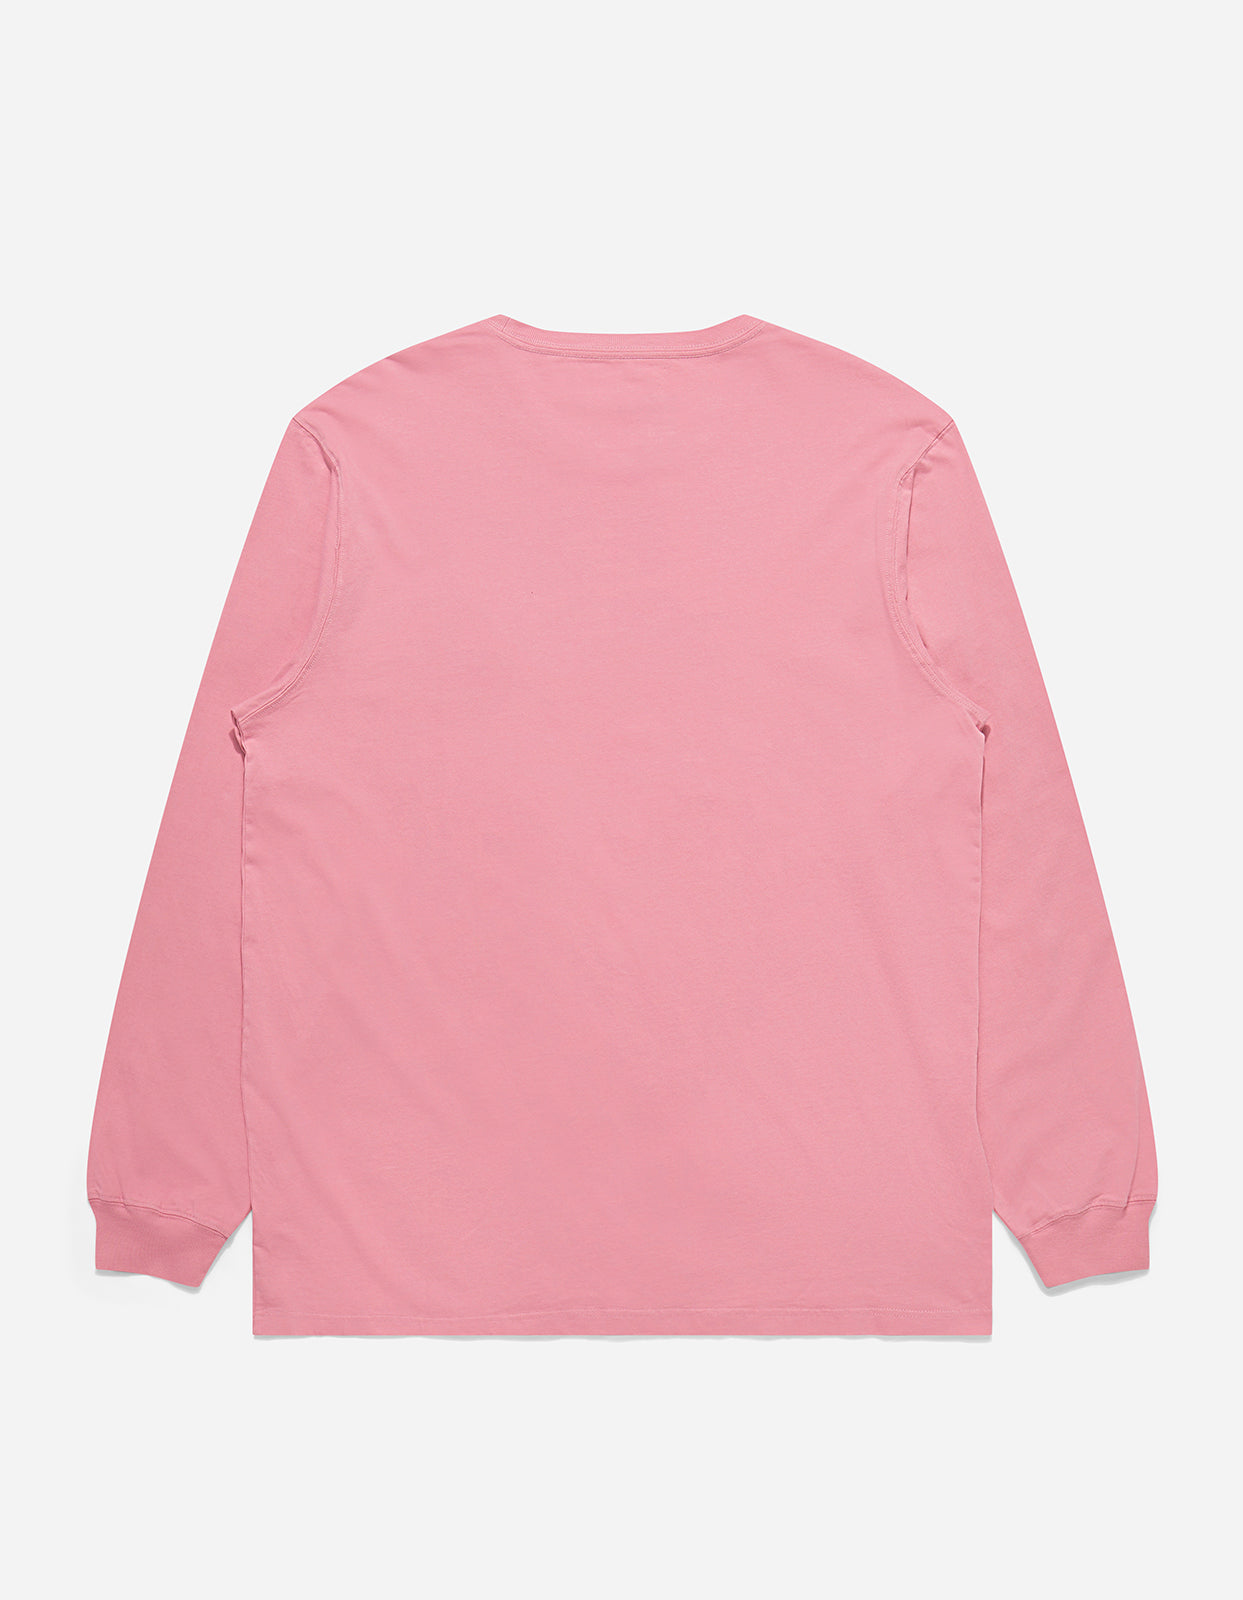 9858 Mahapatchco. Embroidered L/S T-Shirt Magenta